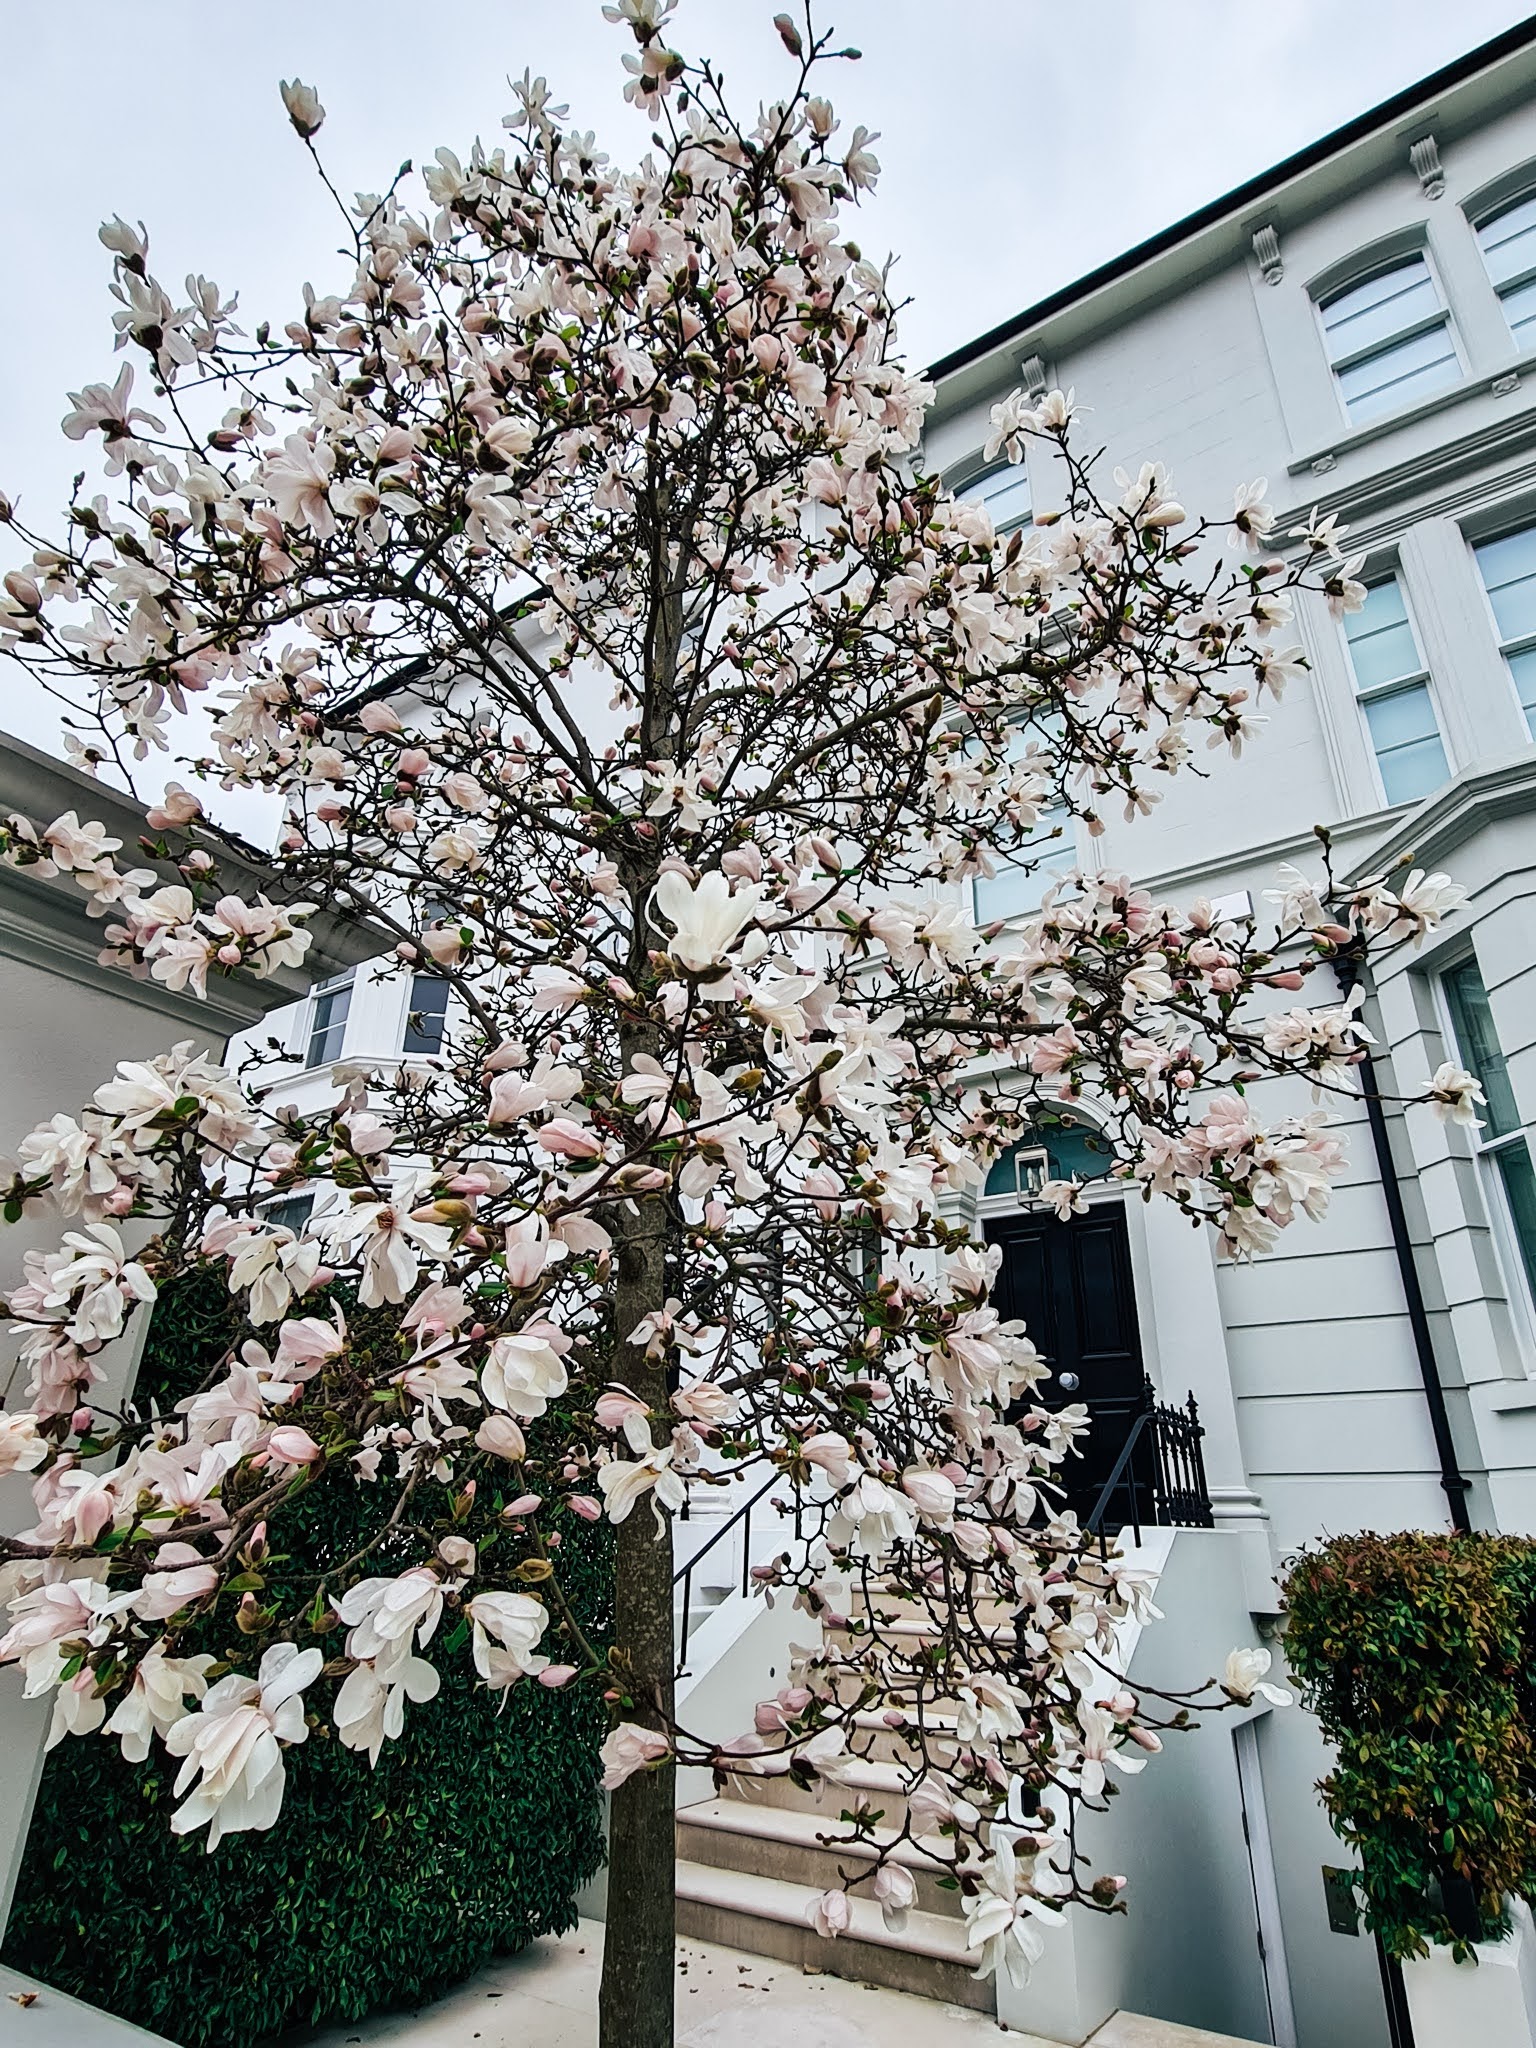 Instagrammable London blossom